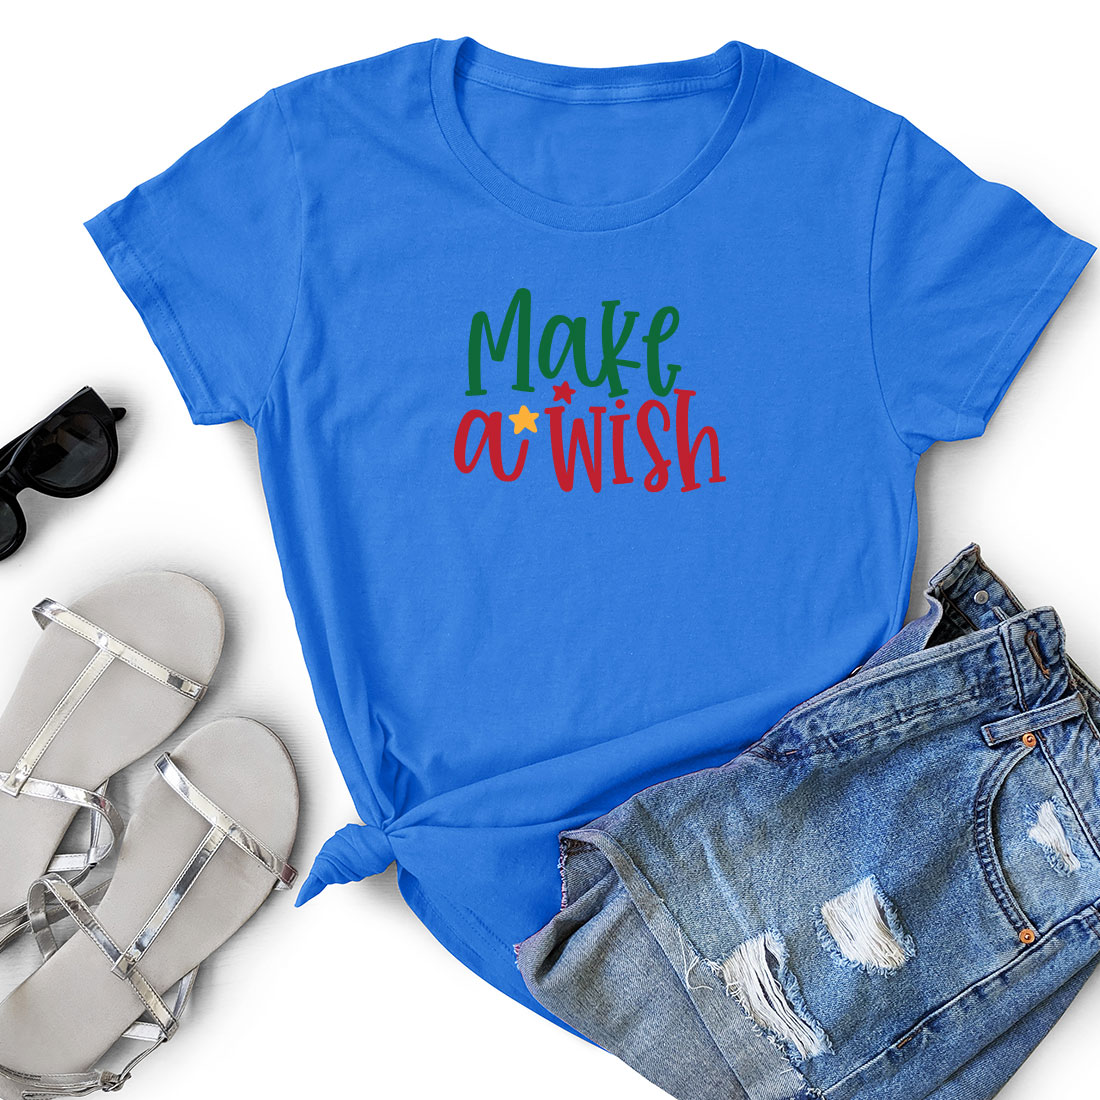 T - shirt that says make a wish next to a pair of shorts.